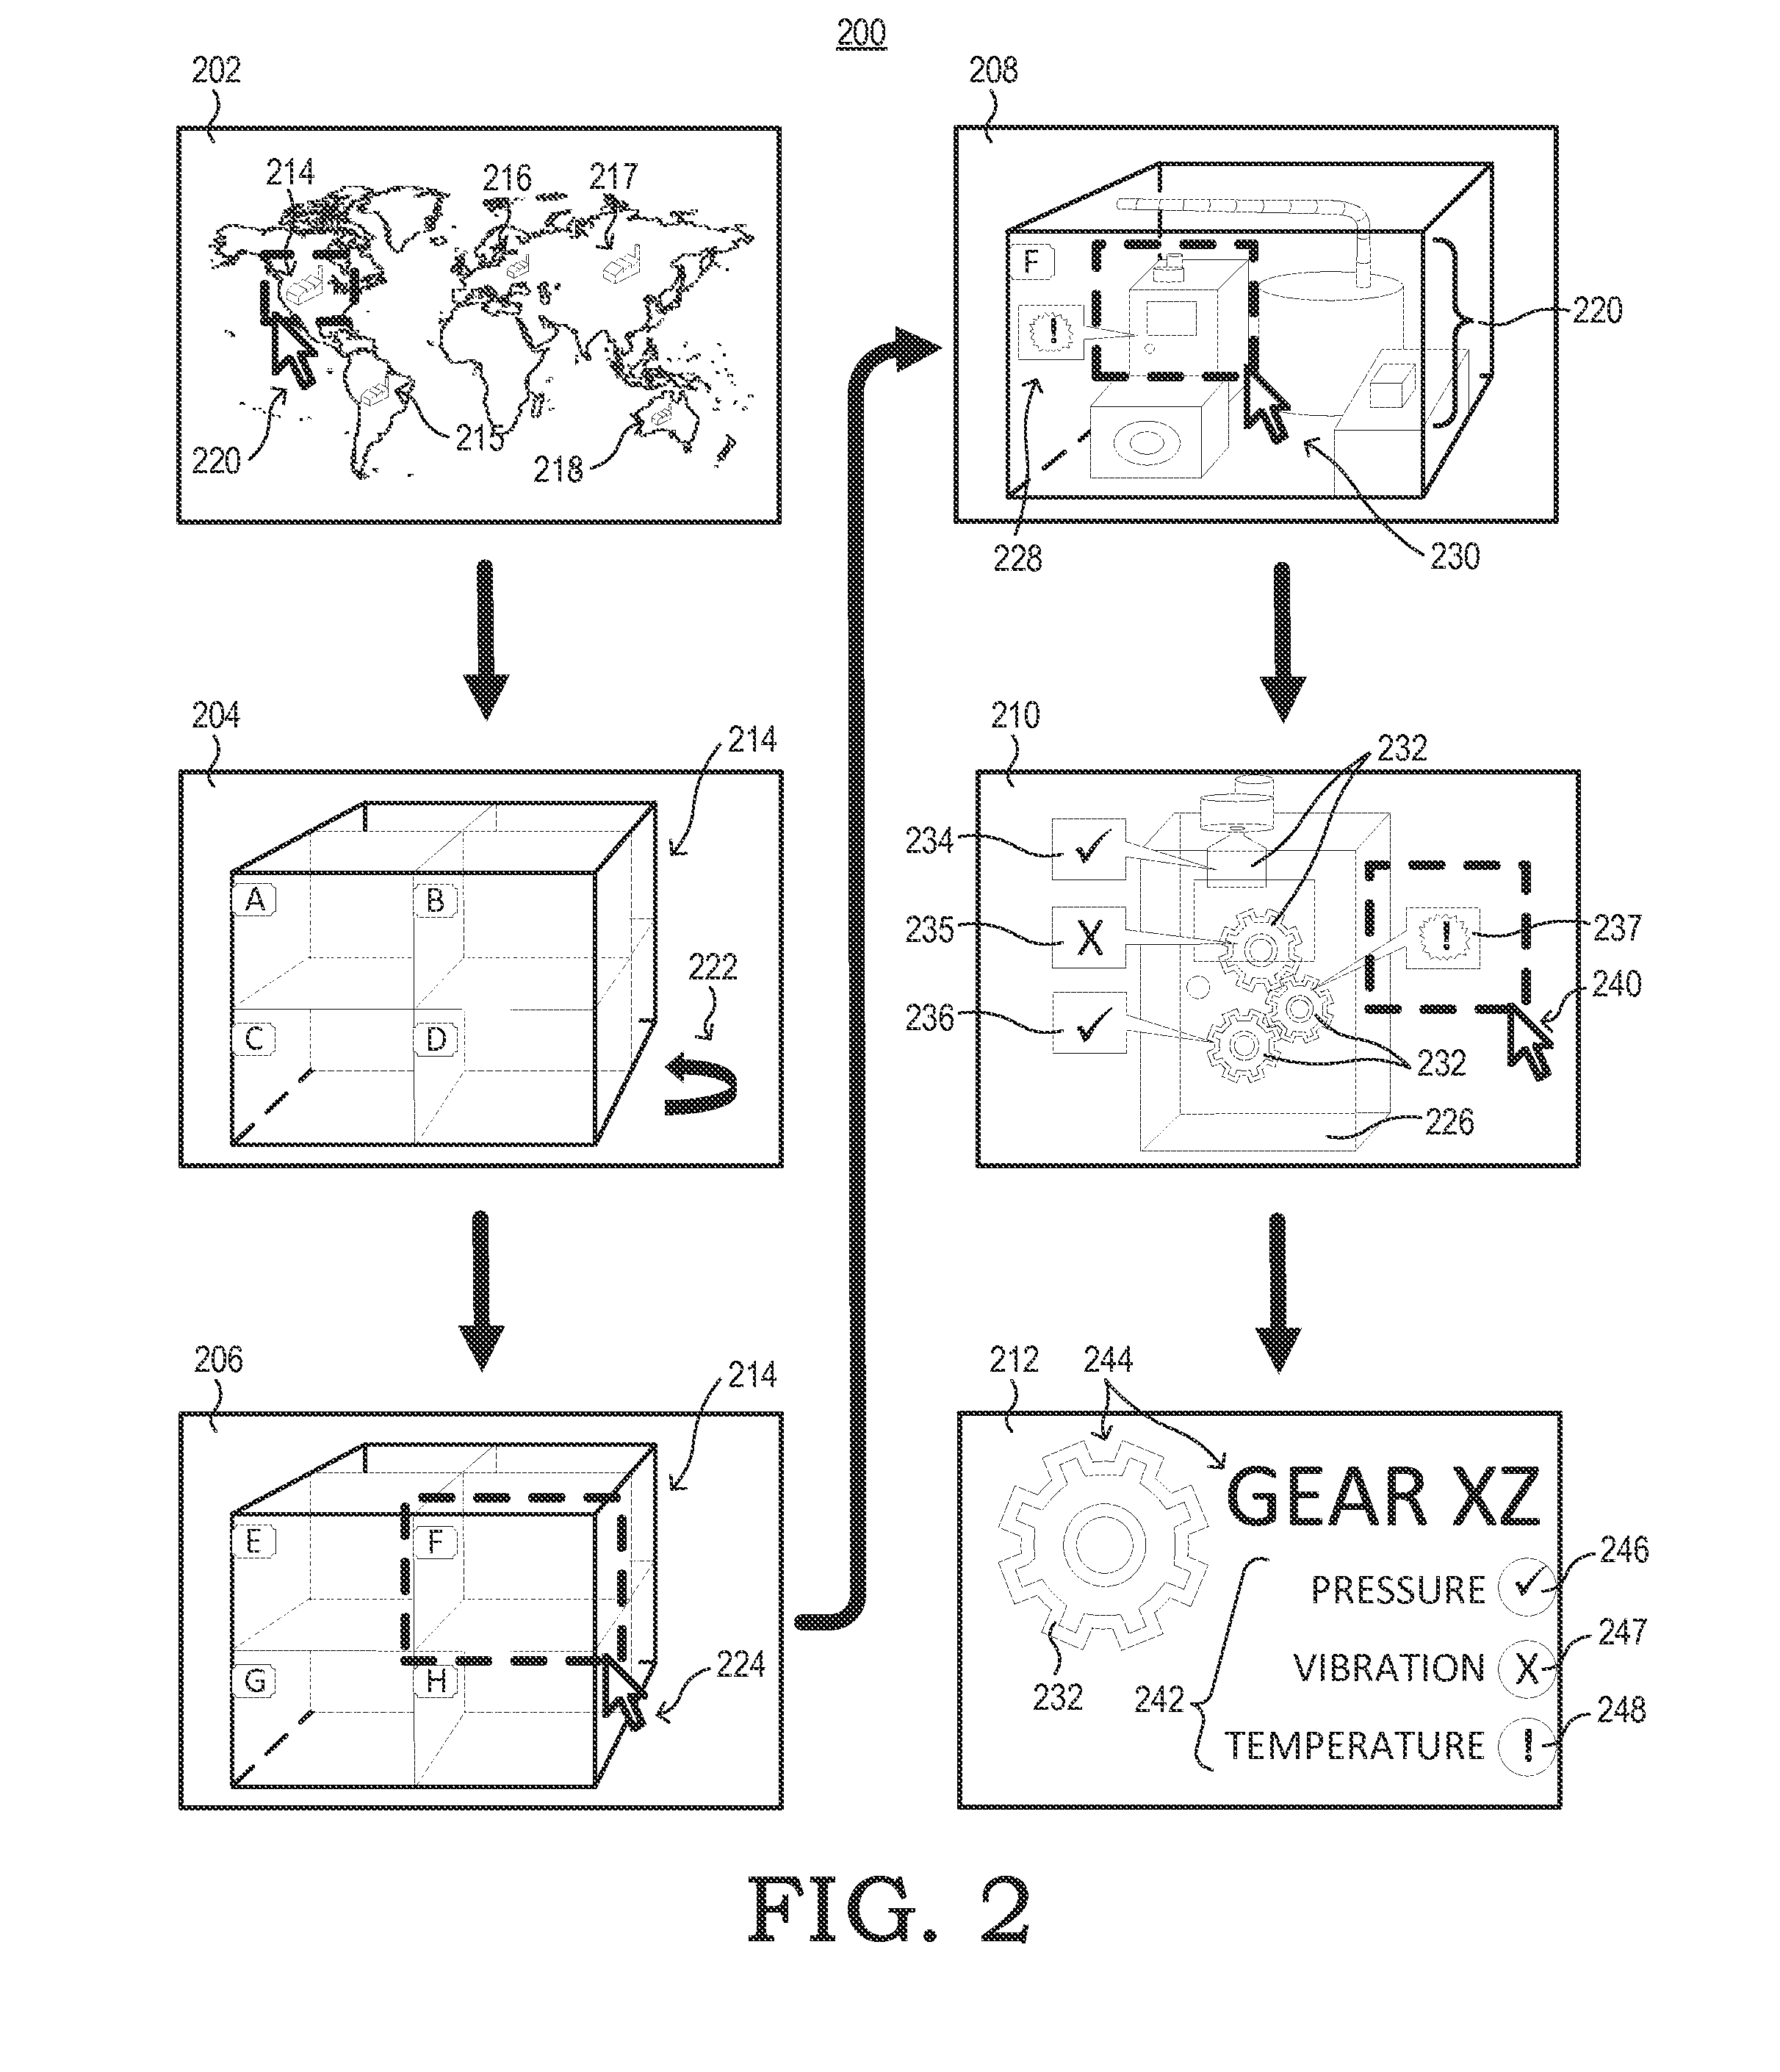 System and method for multi-dimensional modeling of an industrial facility